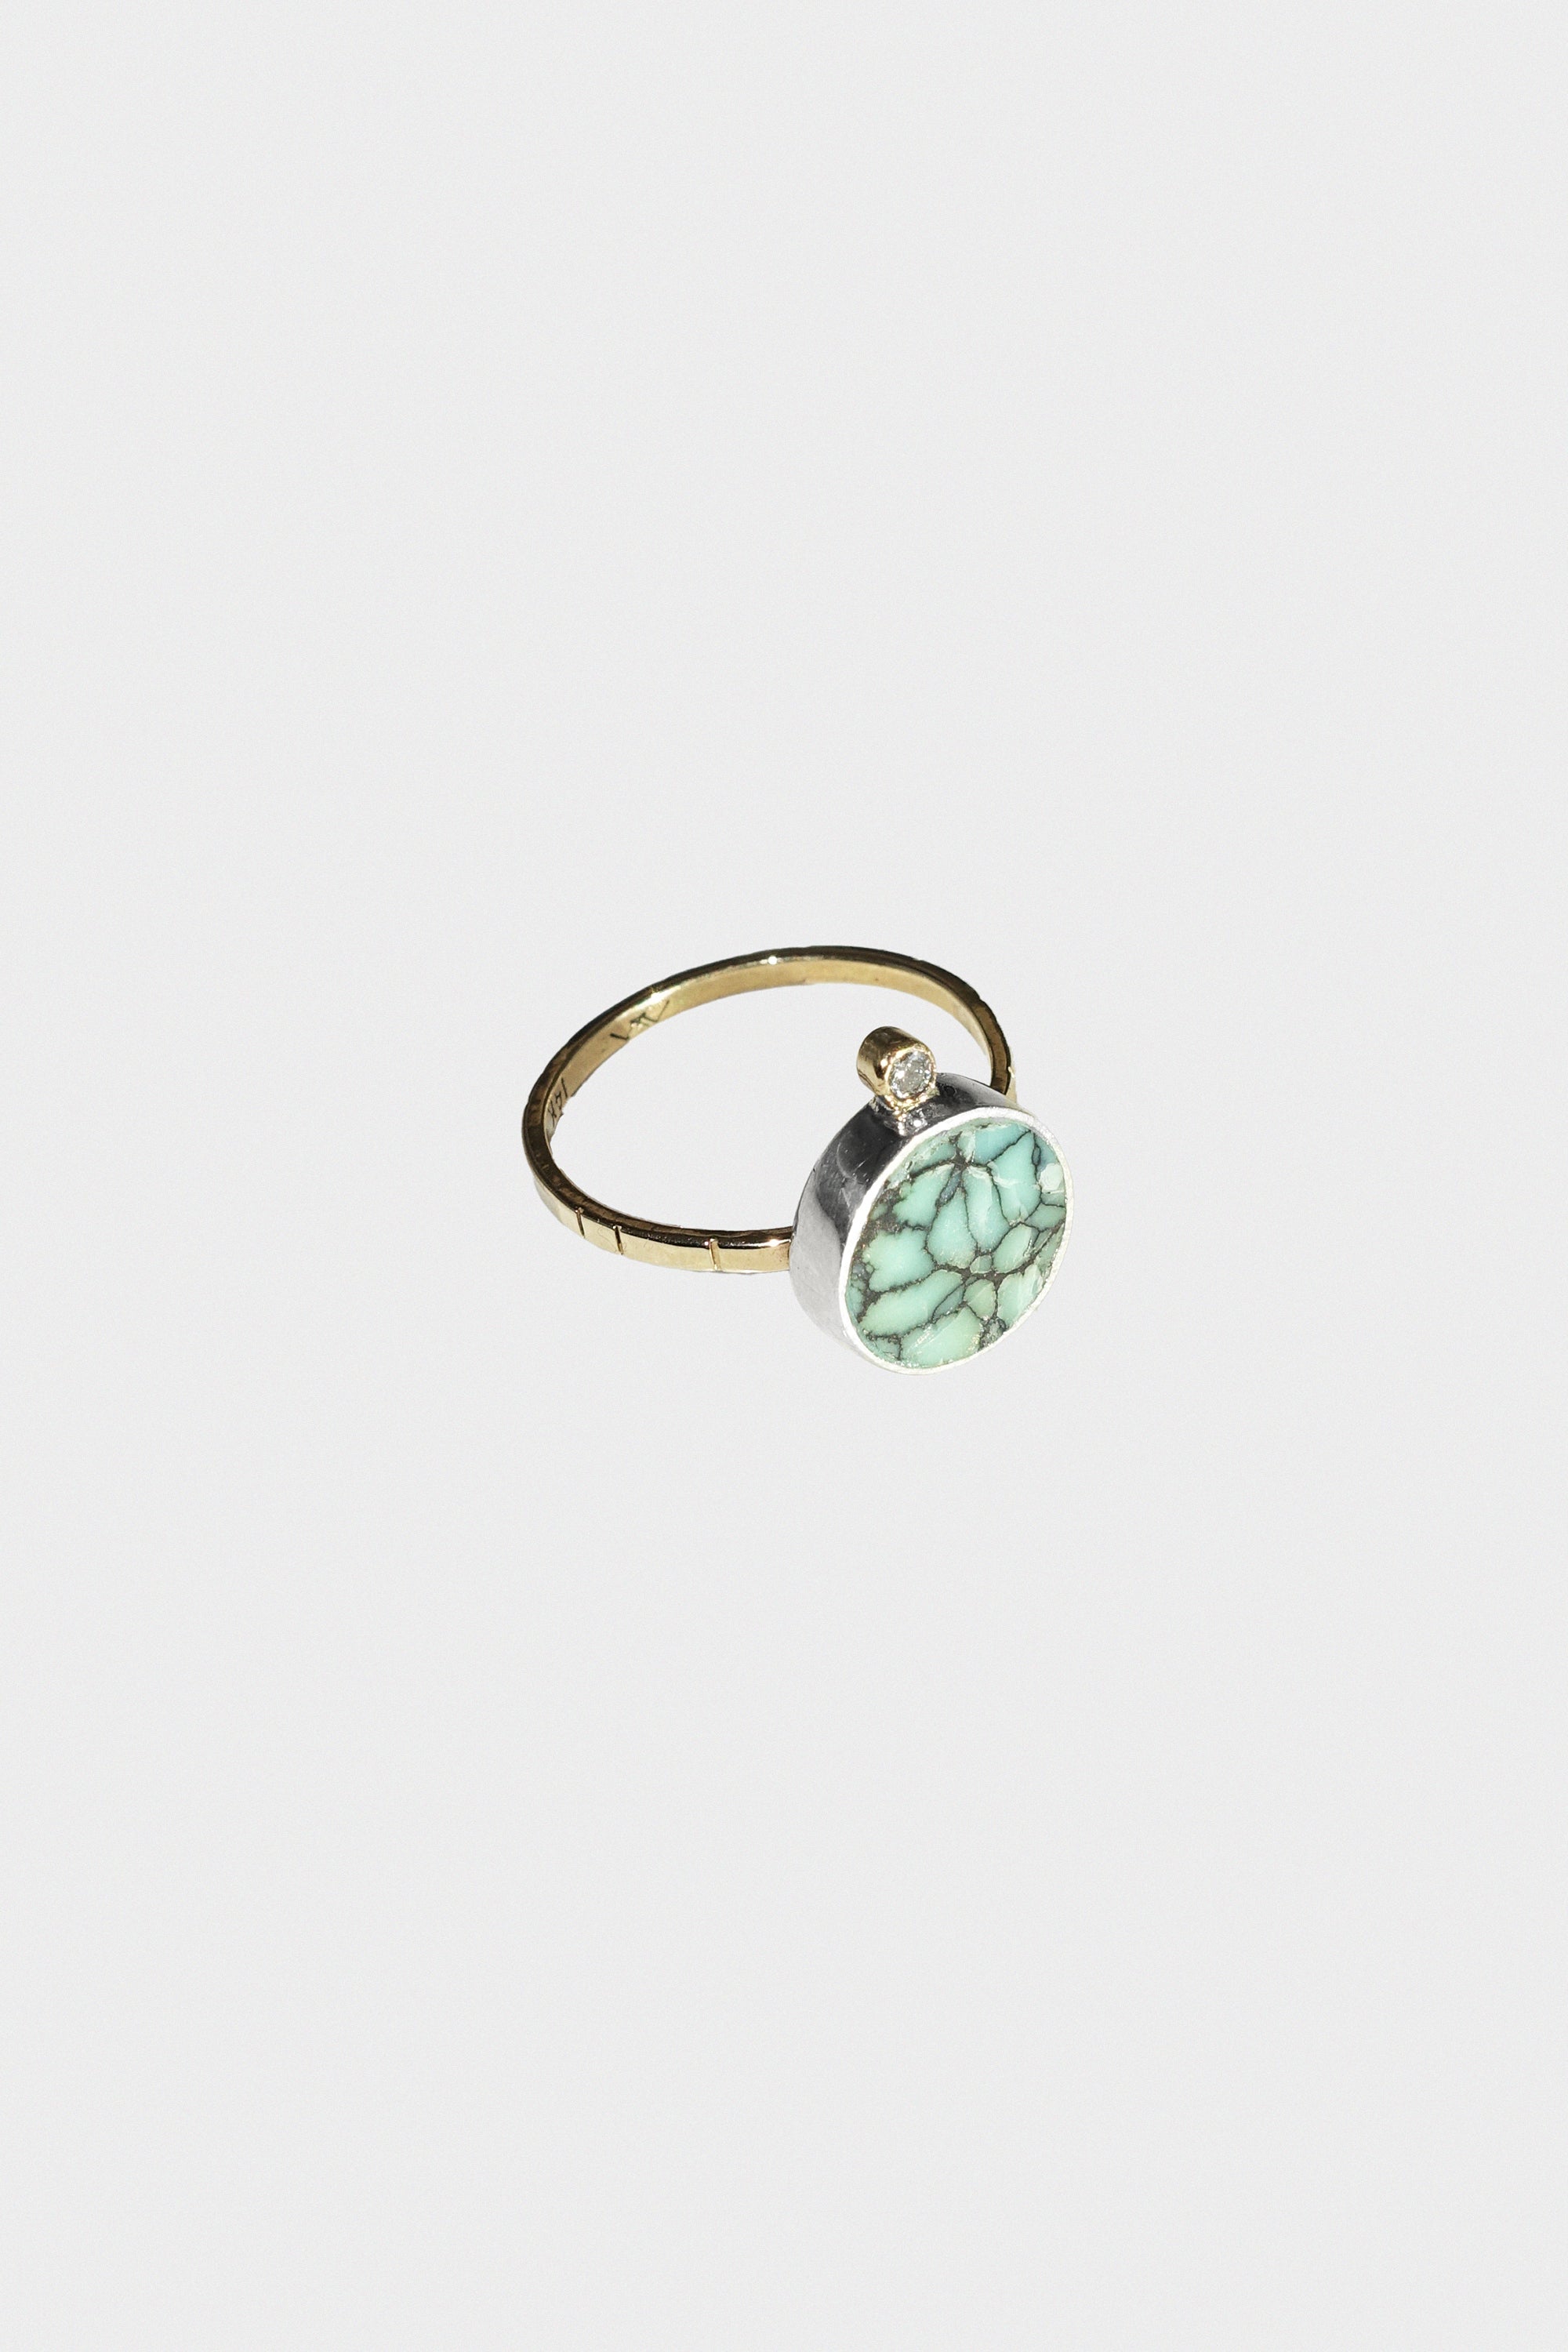 Geo Circle Ring in Angel Wing Turquoise & 14k Yellow Gold